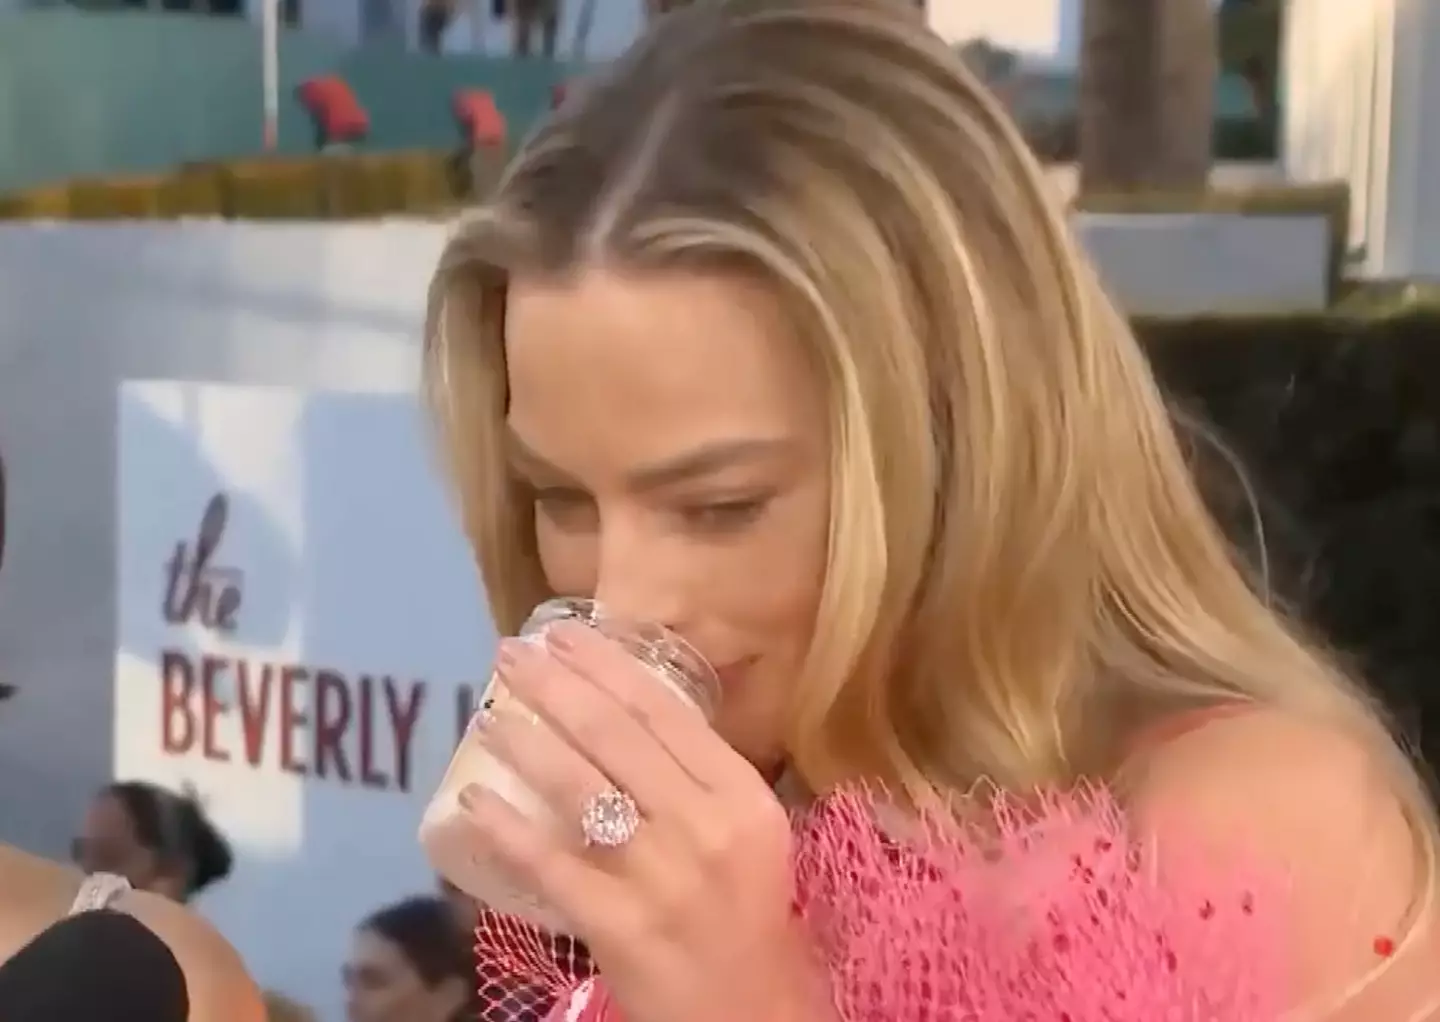 Margot Robbie gave the candle a good sniff.